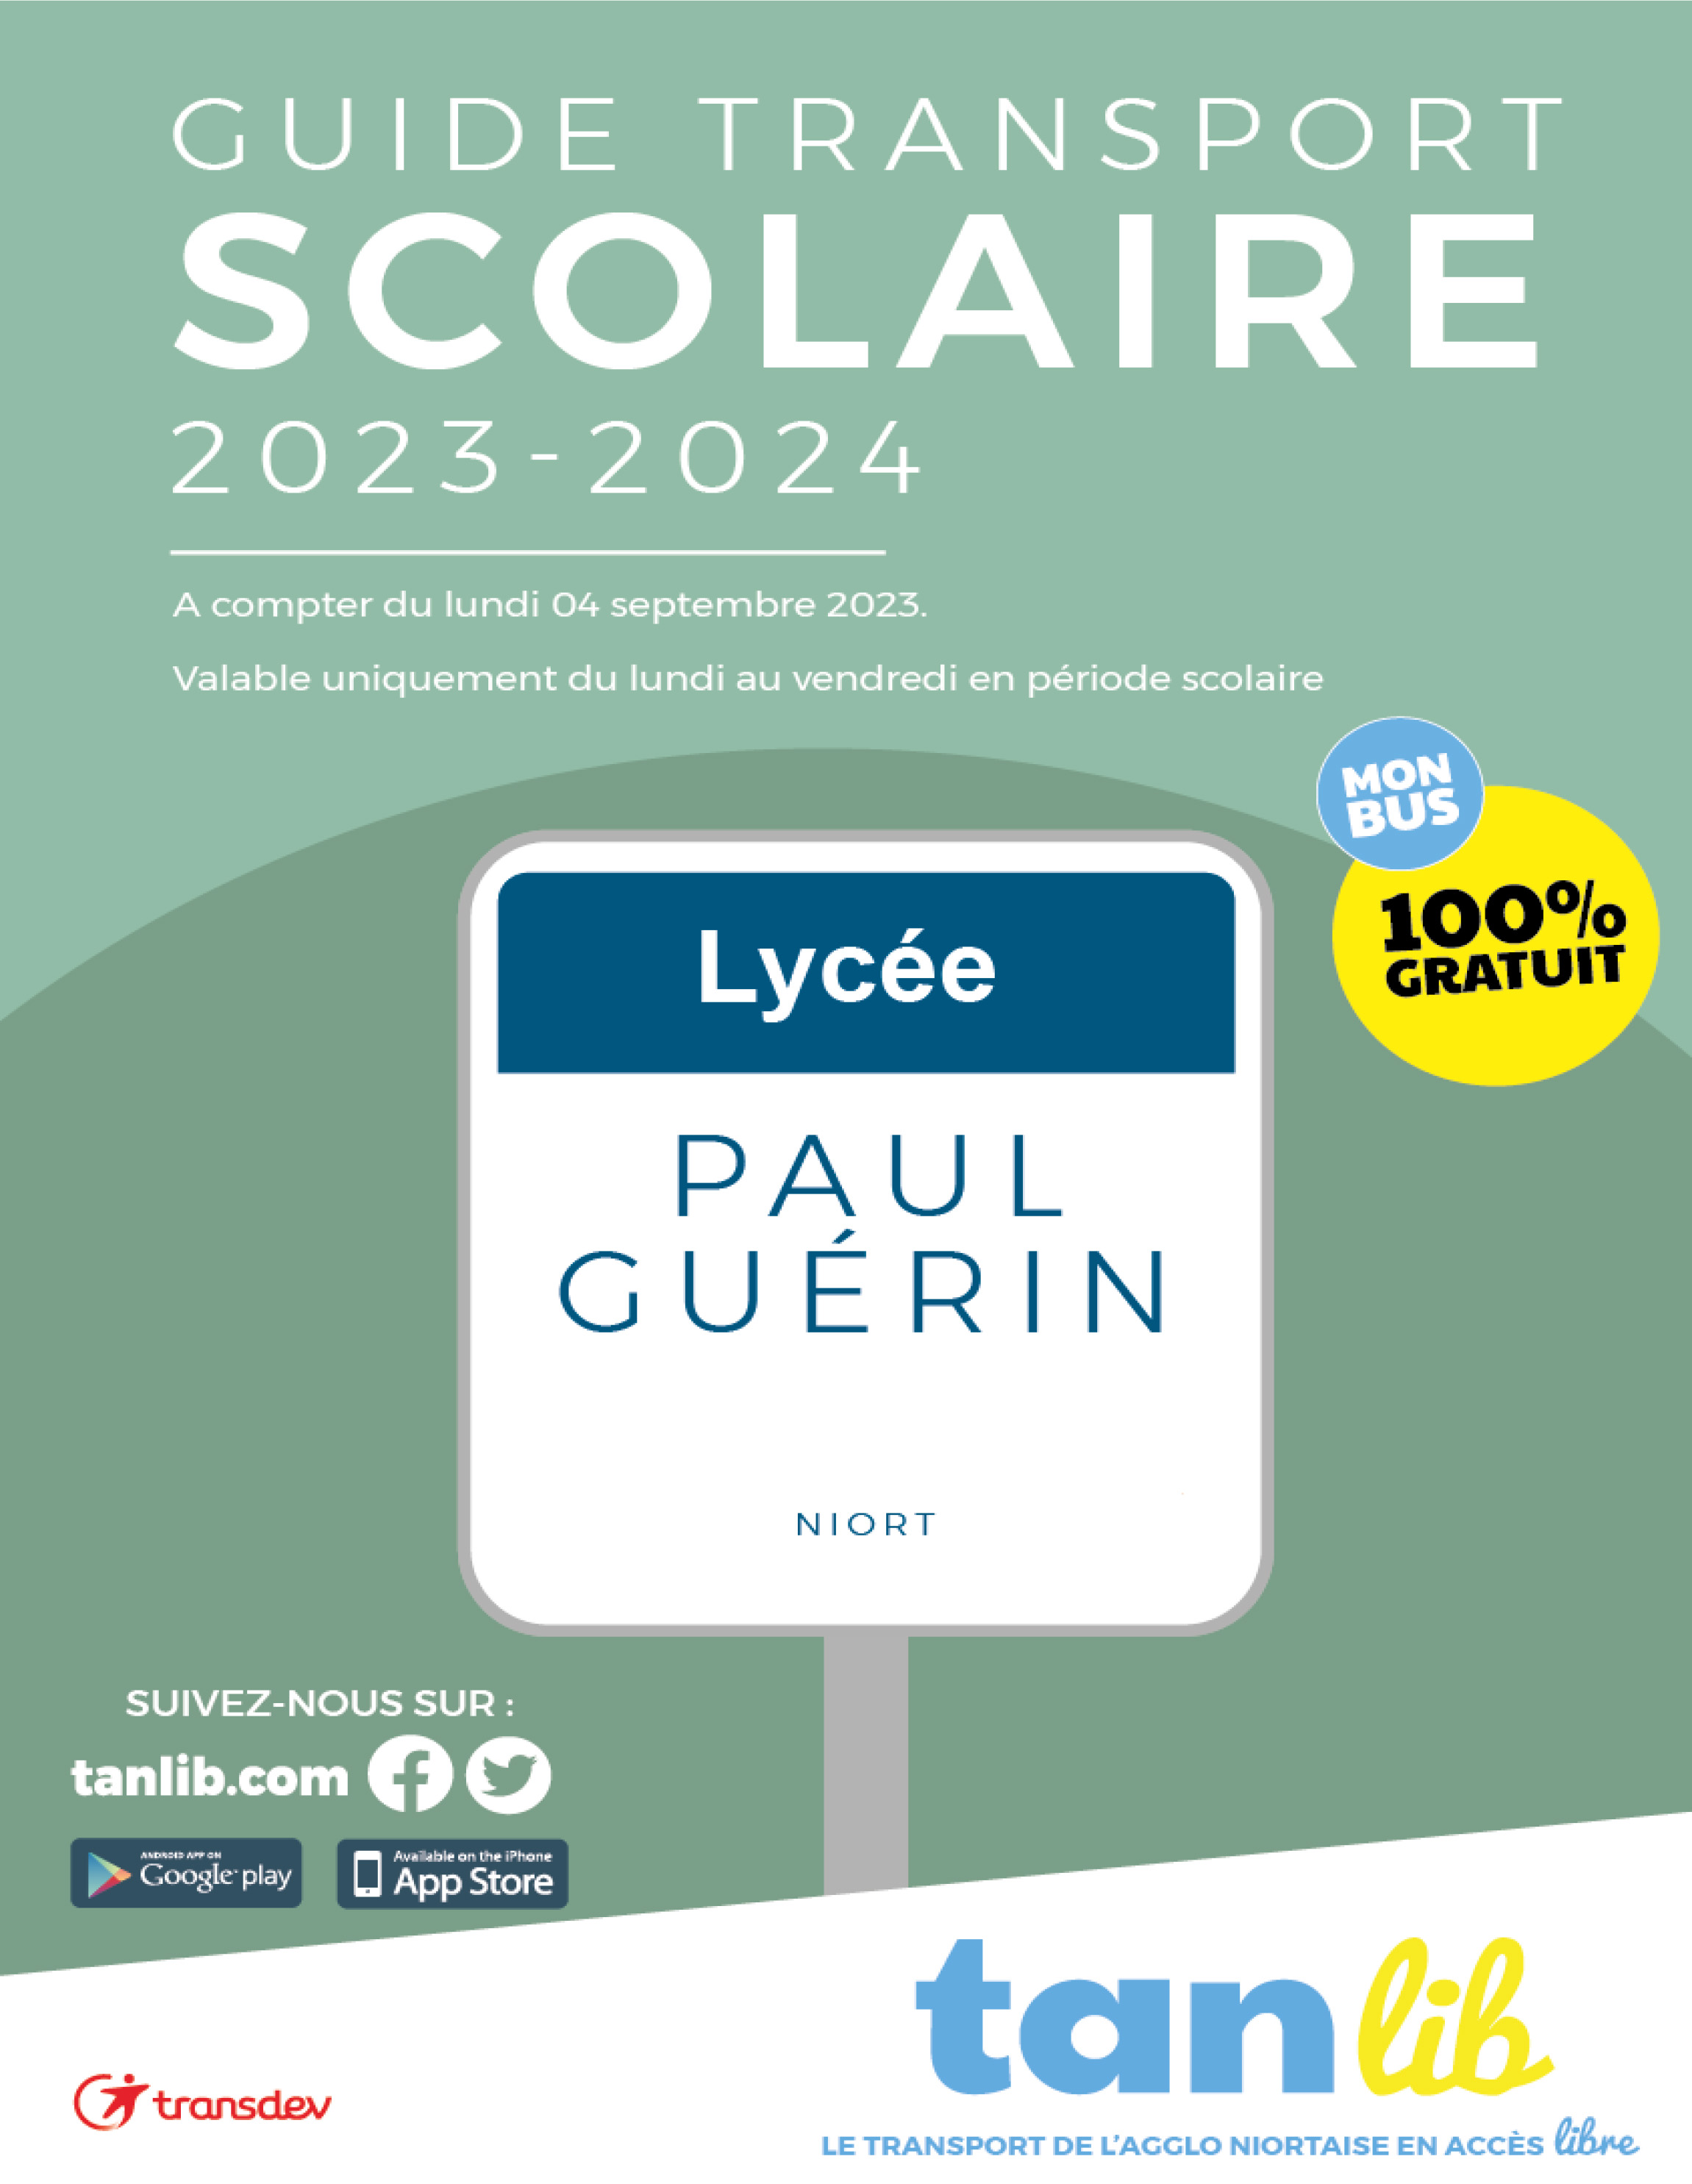 Guide transport scolaire Paul guérin